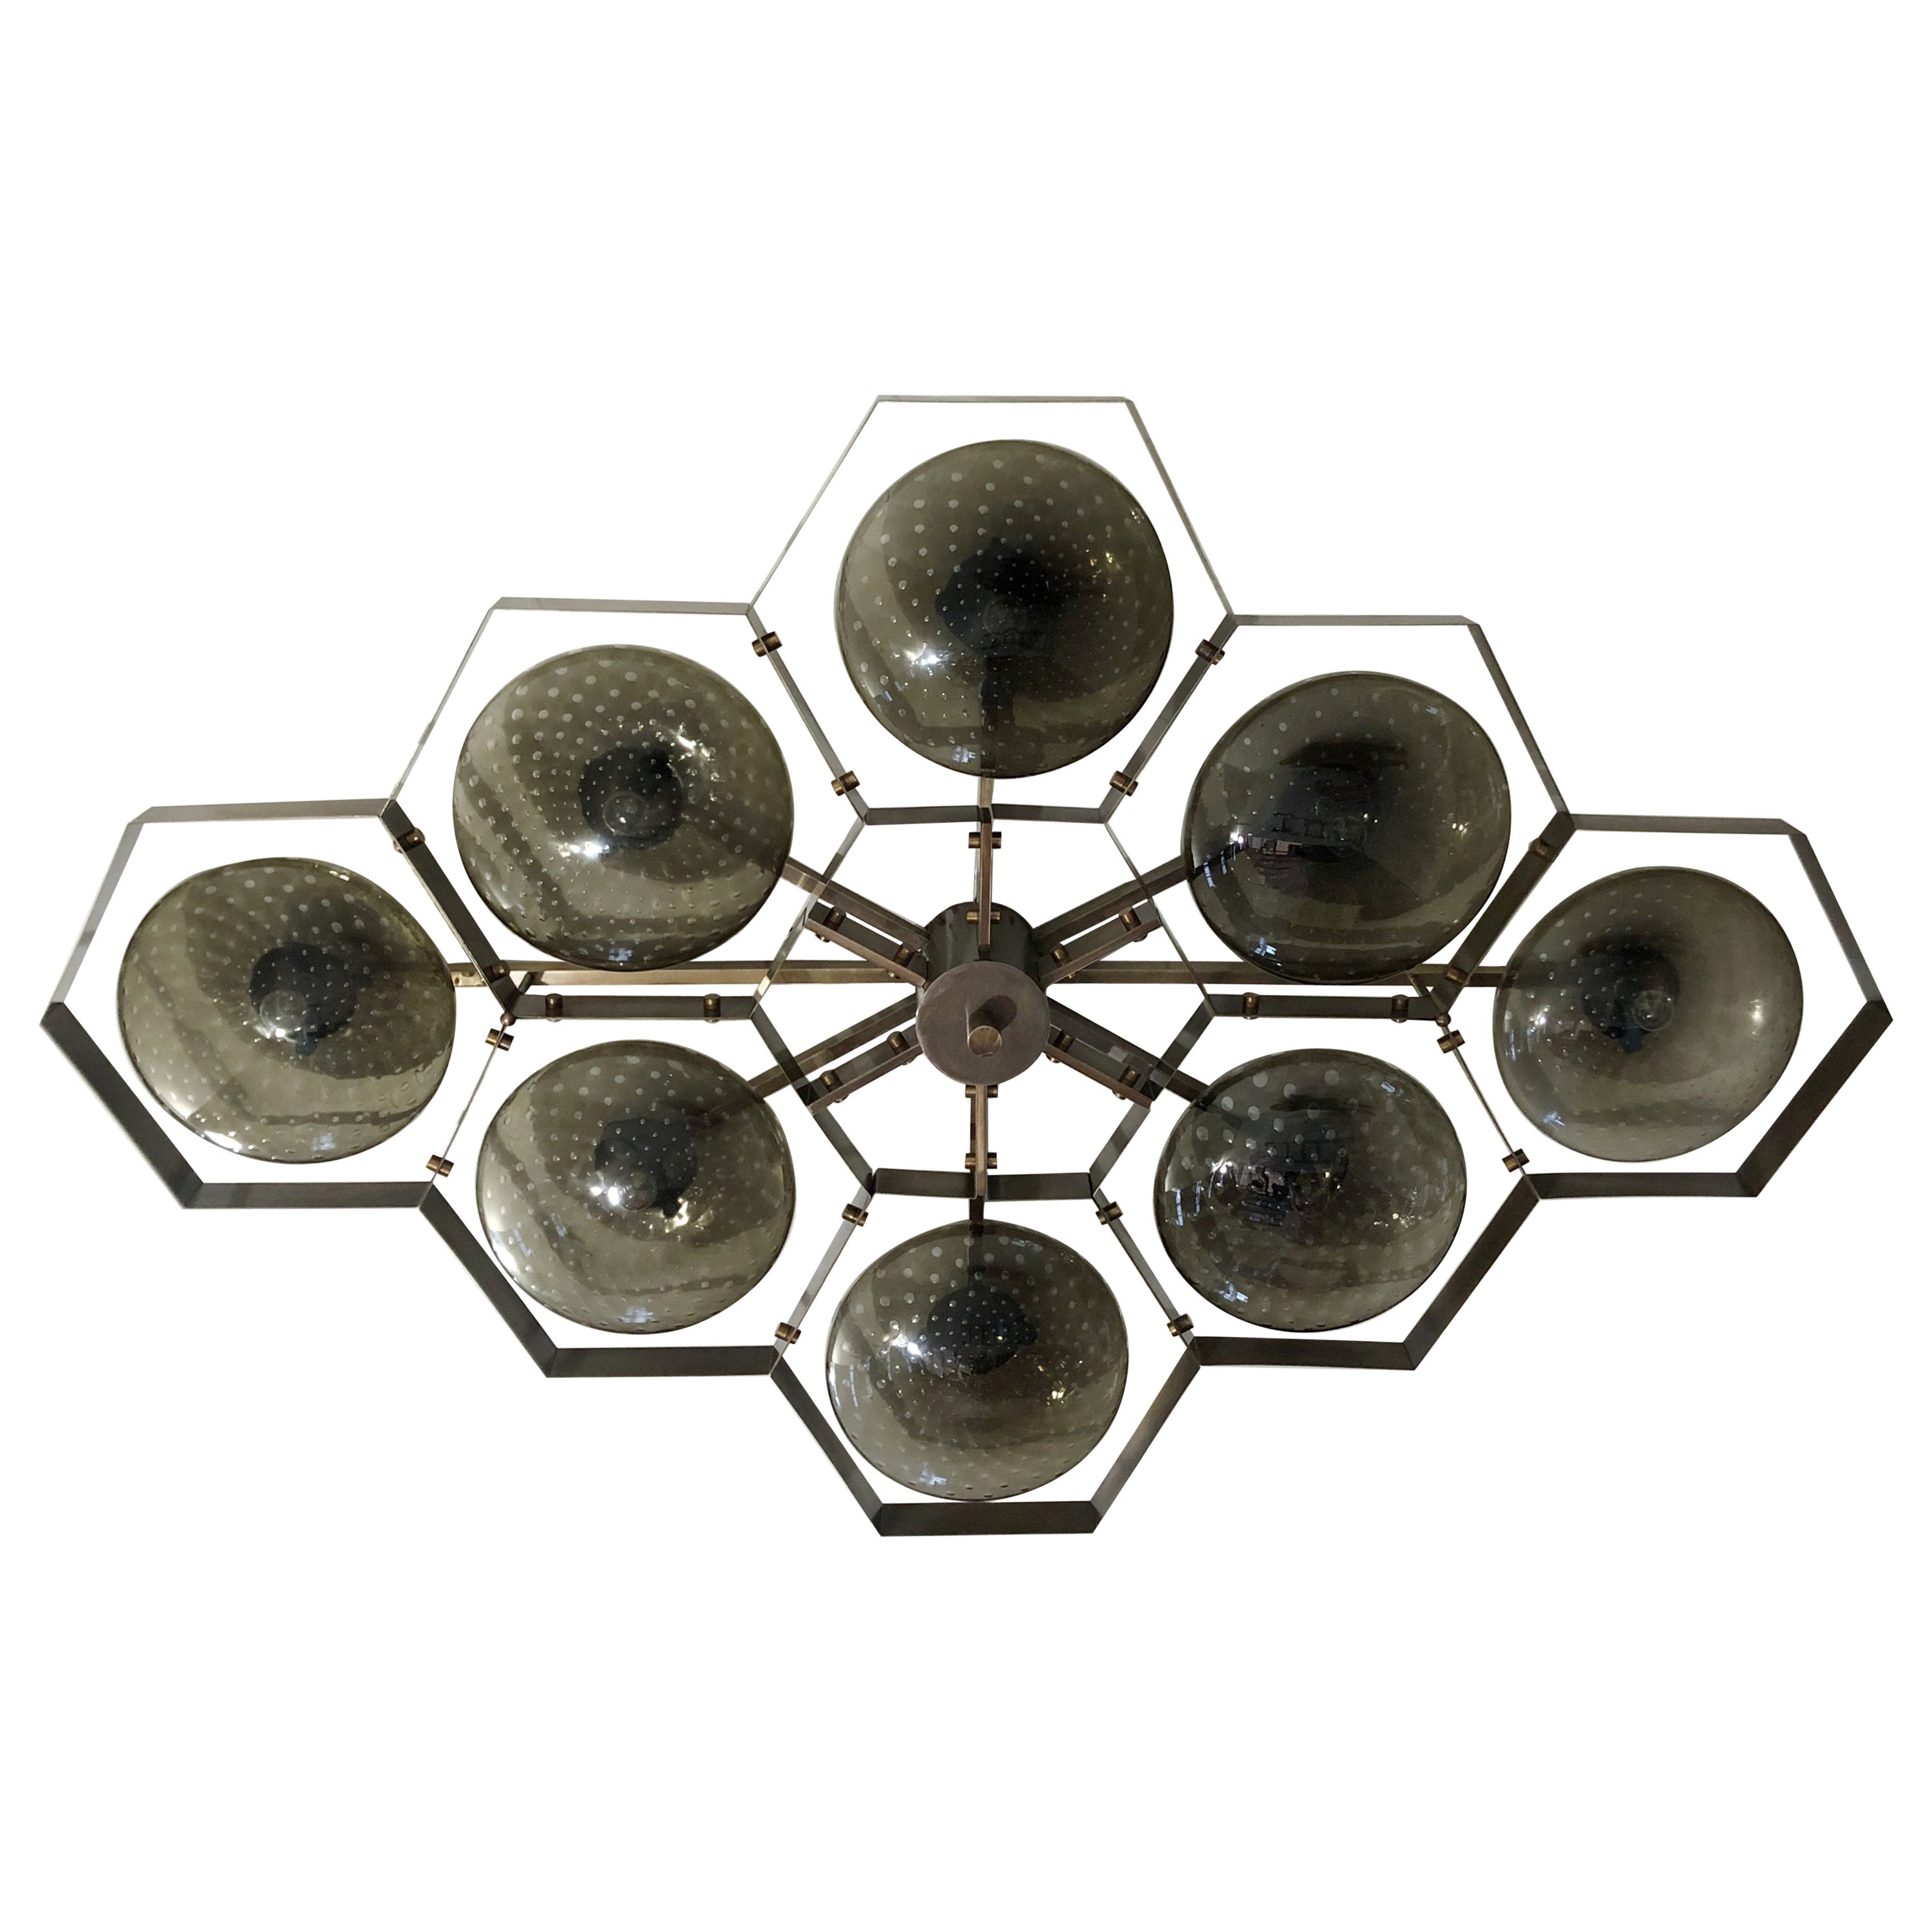 Italian flush mount with Murano glass shades mounted on solid brass frame / Made in Italy
Designed by Fabio Ltd, inspired by Angelo Lelli and Arredoluce styles
8 lights / E12 or E14 / max 40W each
Measures: Length 65 inches, width 42.5 inches,